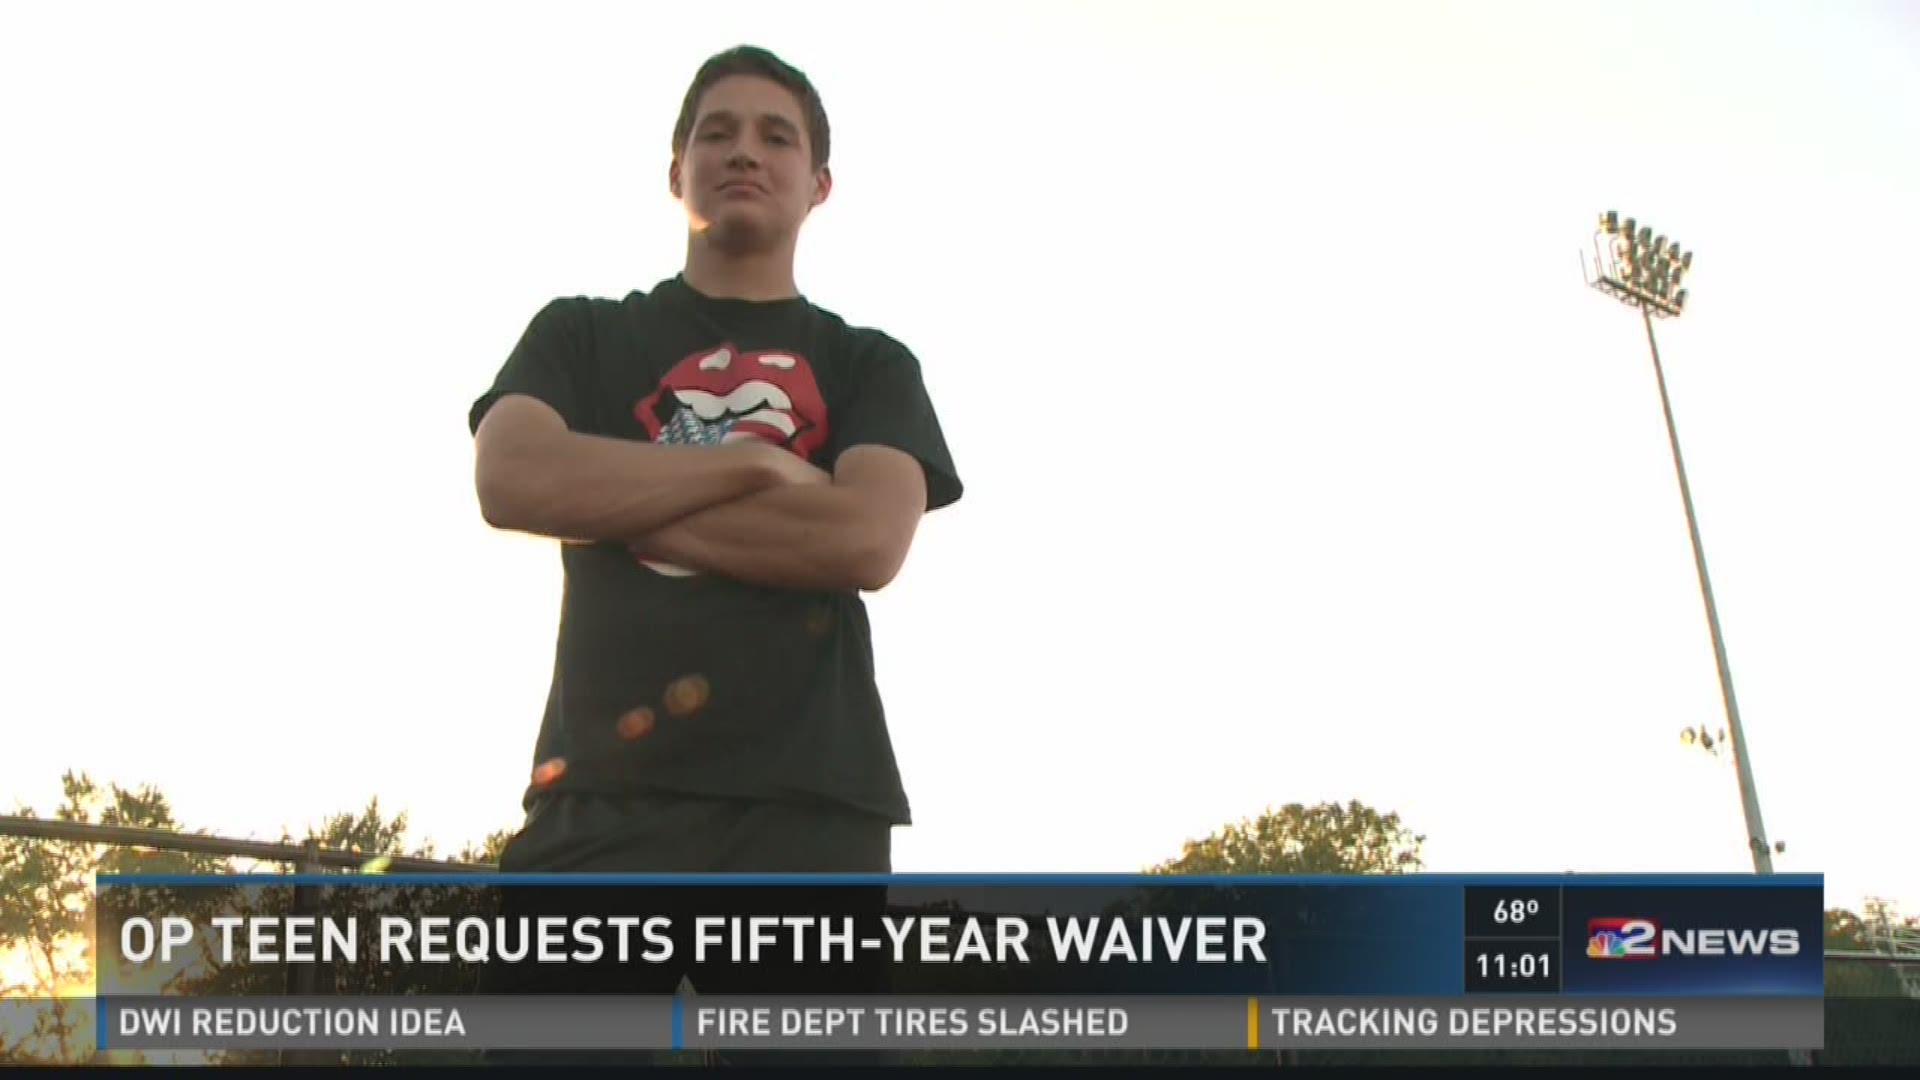 OP teen requests fifth-year waiver